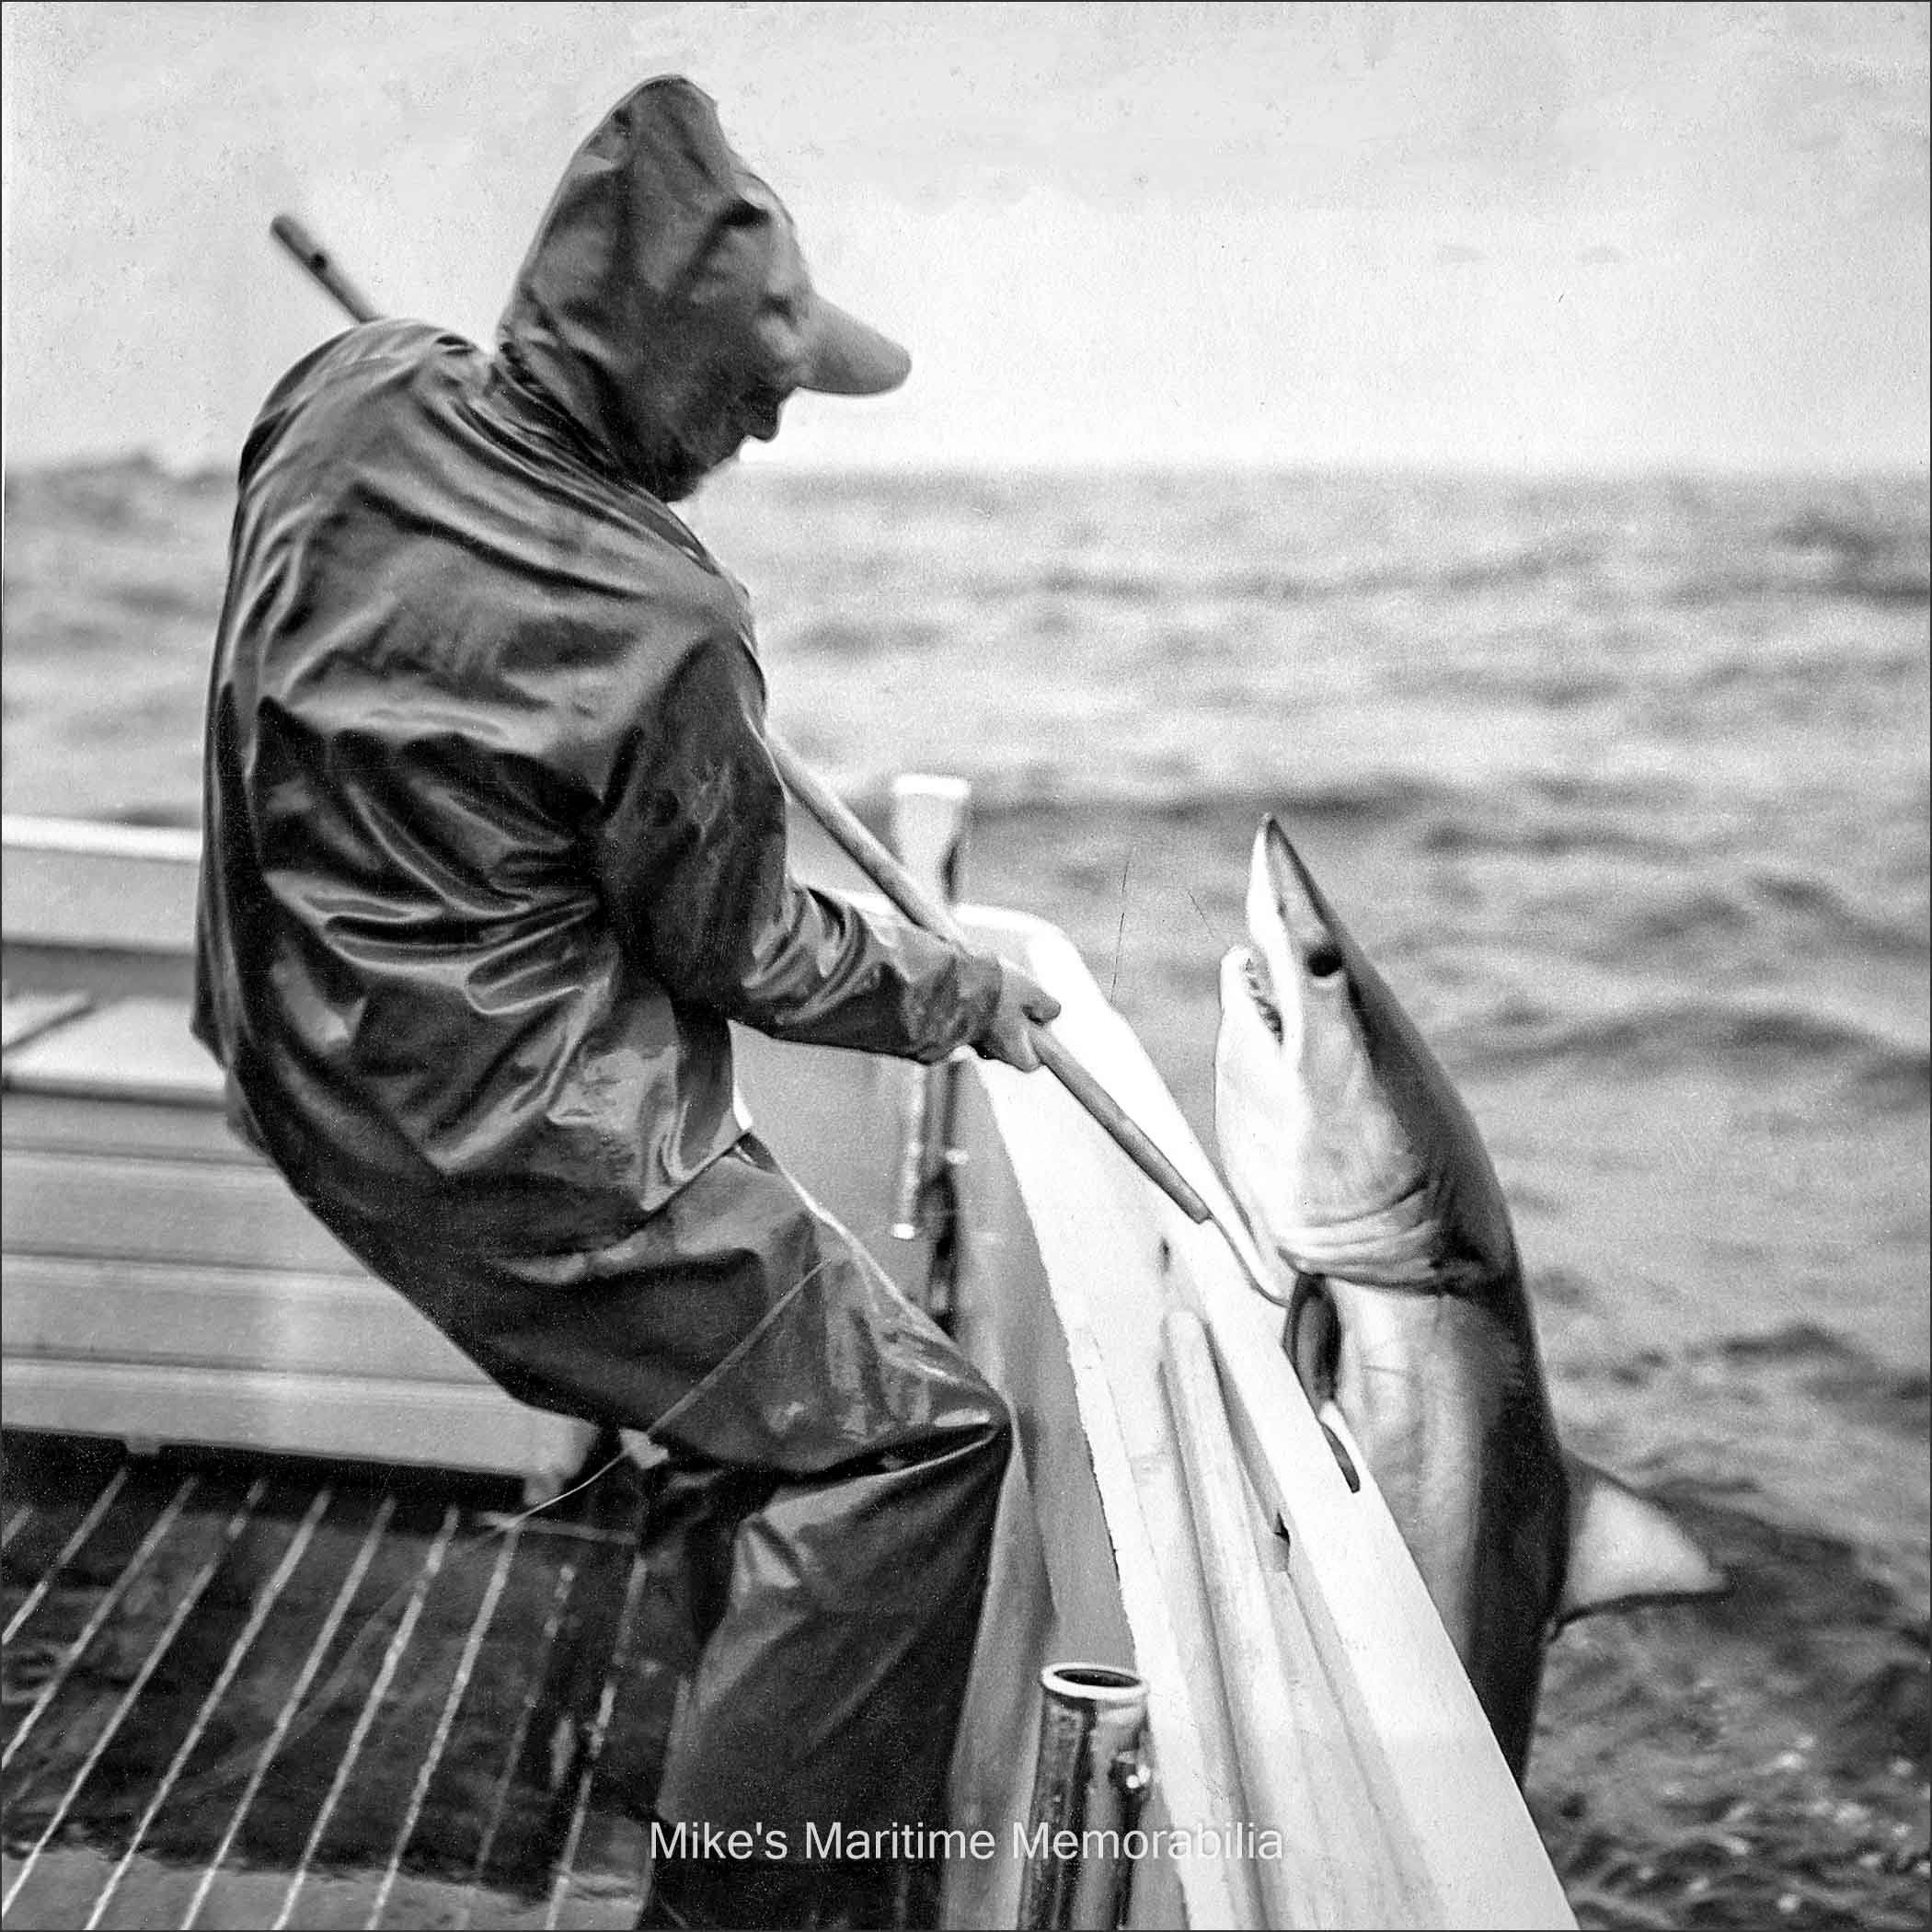 CRICKET II, Montauk, NY – 1953 A Mako shark coming over the side of Captain Frank Mundus' "CRICKET II" on a stormy day off Montauk Point circa 1953. According to the note on the back of the photo, this is a little one, weighing only 96 pounds. The "CRICKET II" was The boat was built in 1947 and launched in 1948 by Chesapeake bayman Tiffany Cockrell at the Glebe Point Motor Boat Co. in Burgess Store, VA. Captain Mundus originally sailed the "CRICKET II" from Brielle, NJ before relocating to Montauk, NY in July of 1951. Photograph by the late Cecil Clovelly.